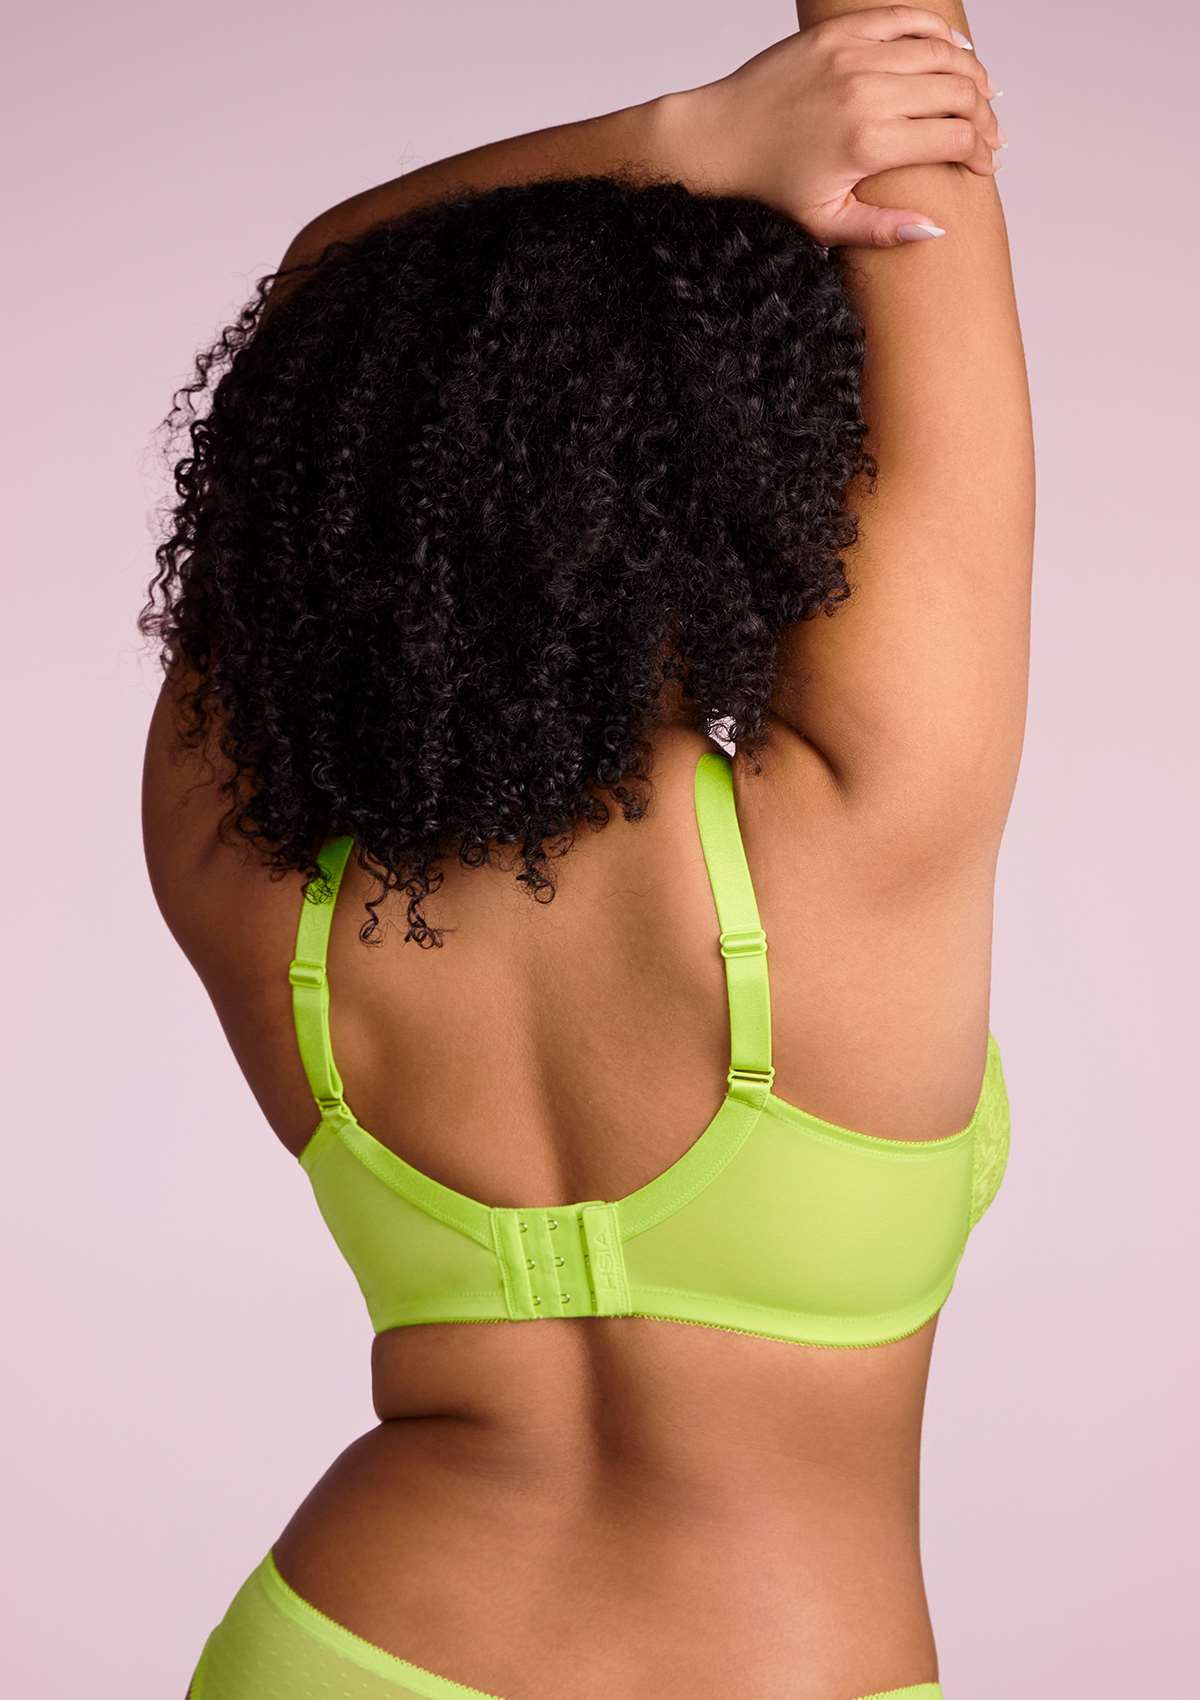 HSIA Enchante Full Cup Minimizing Bra: Supportive Unlined Lace Bra - Lime Green / 38 / D